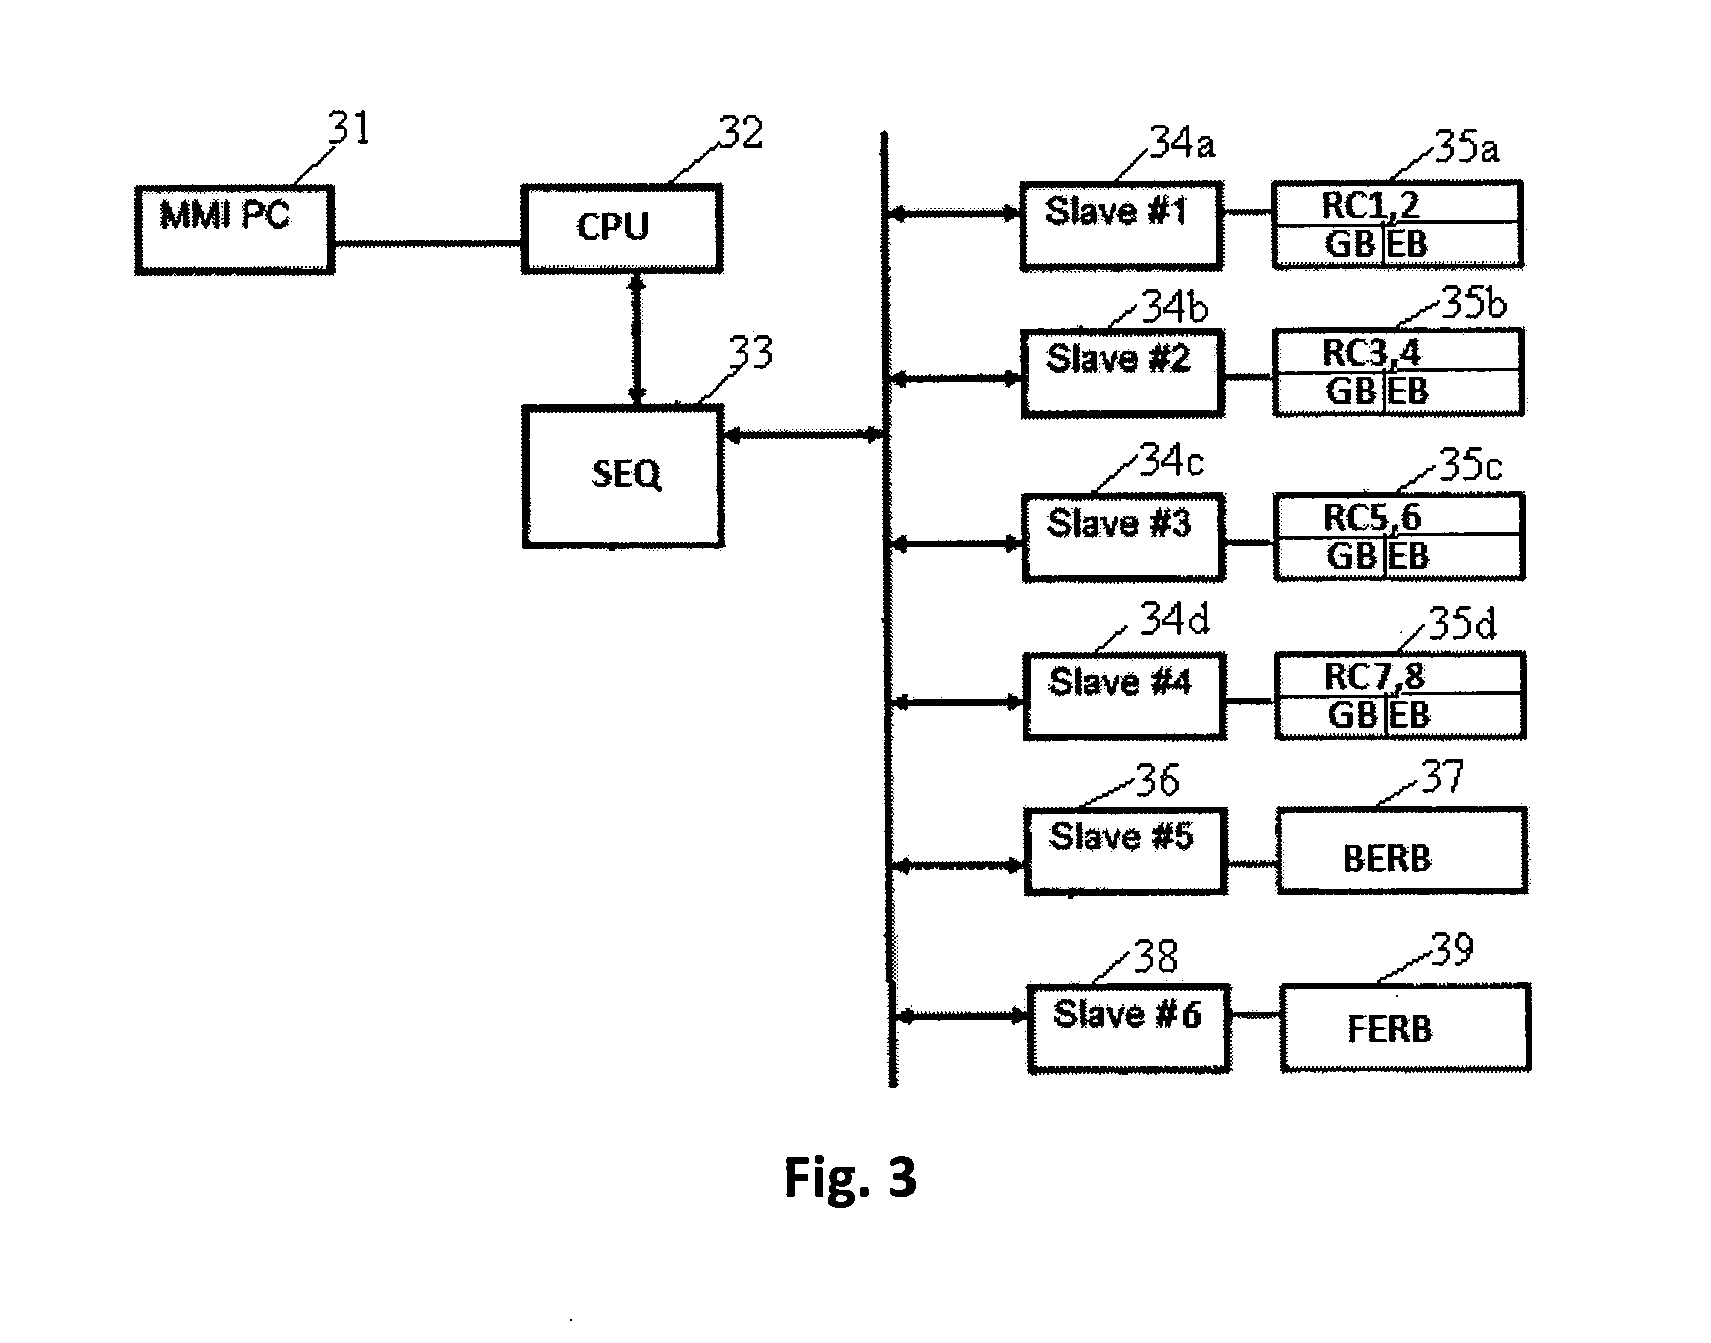 High-Throughput Semiconductor-Processing Apparatus Equipped with Multiple Dual-Chamber Modules